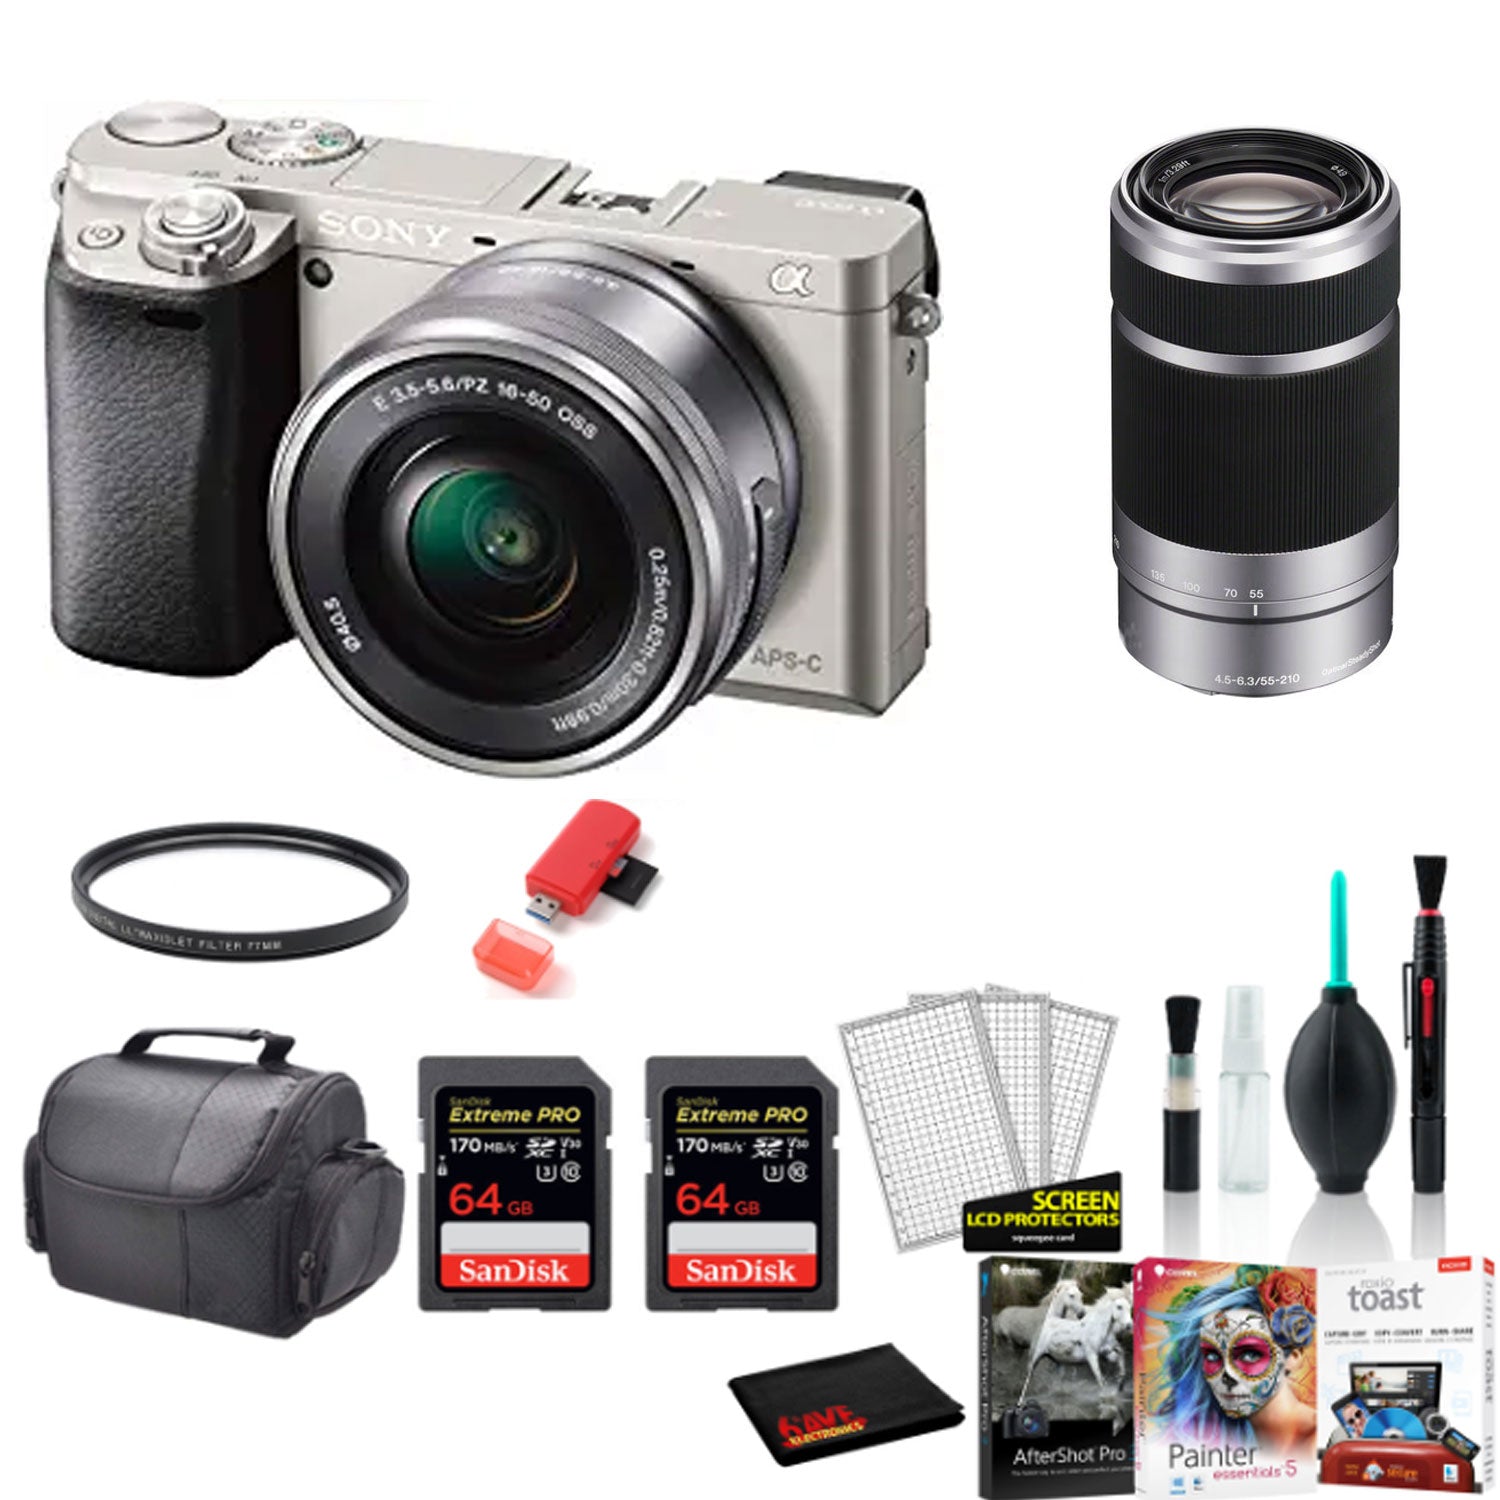 Sony Alpha a6000 Mirrorless Digital Camera with 16-50mm + 55-210mm Lenses (SILVER) with 2x 64GB Memory Card -International Model Bundle